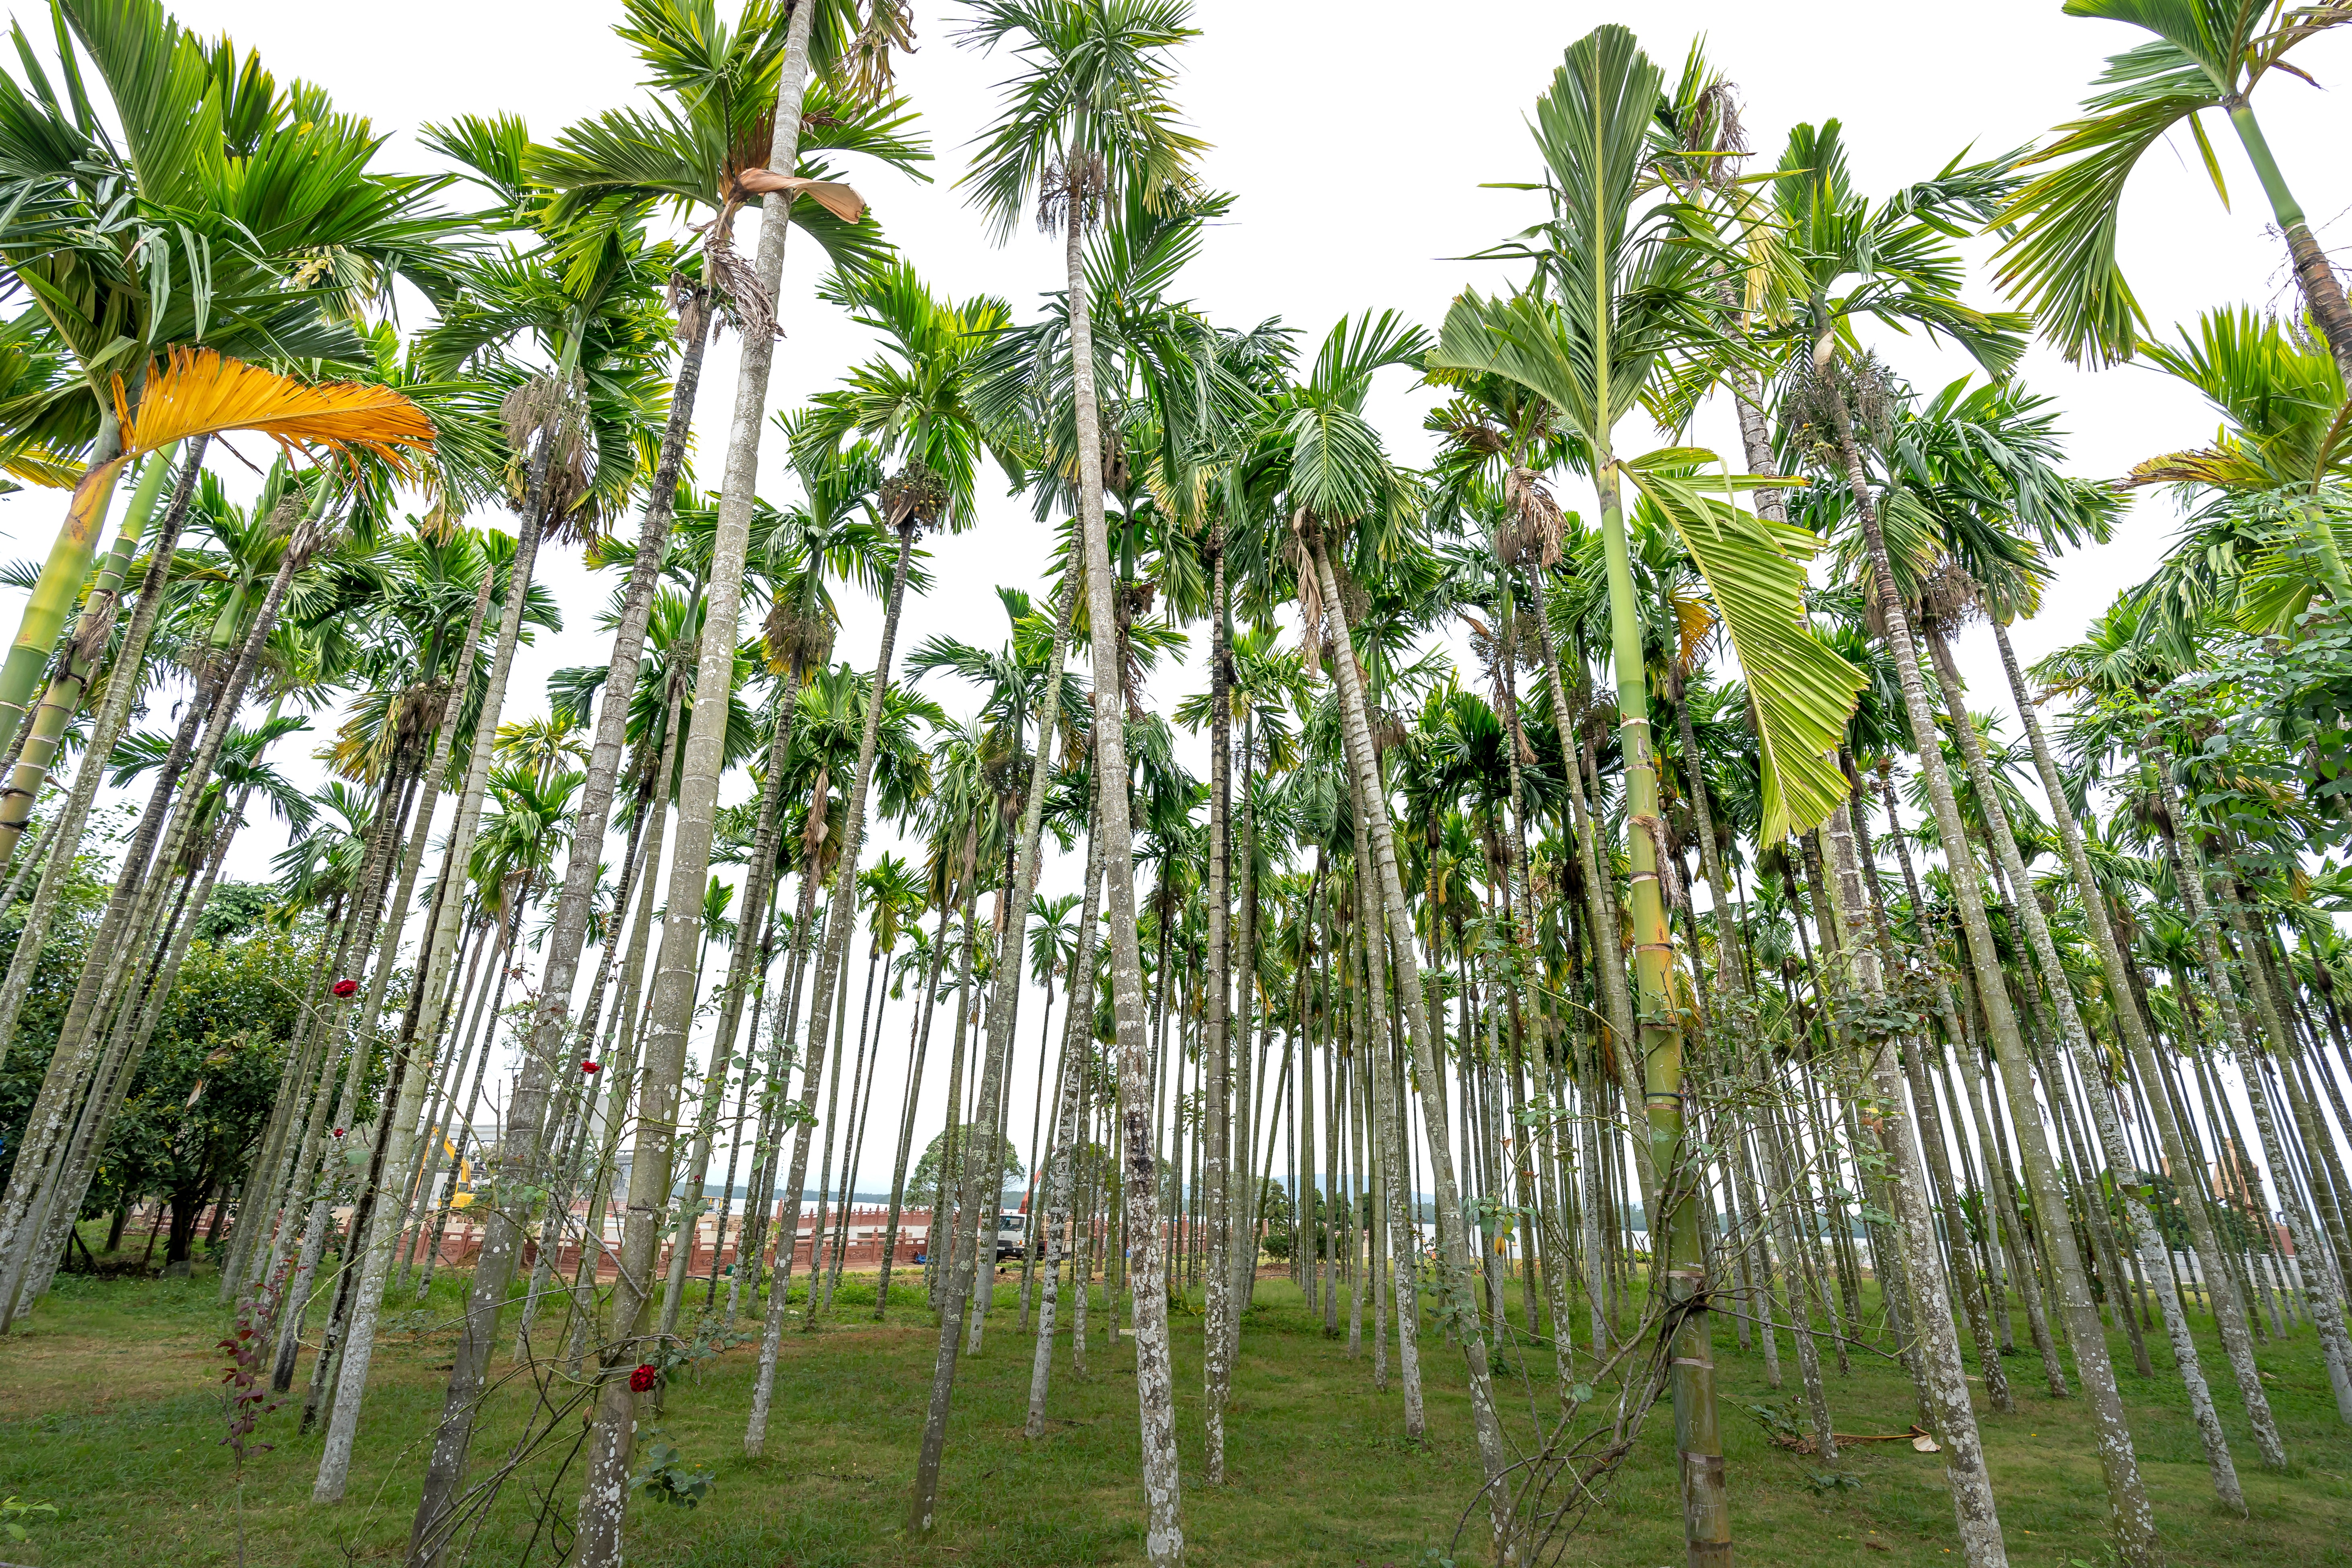 Do you know what we can use an areca palm tree for?